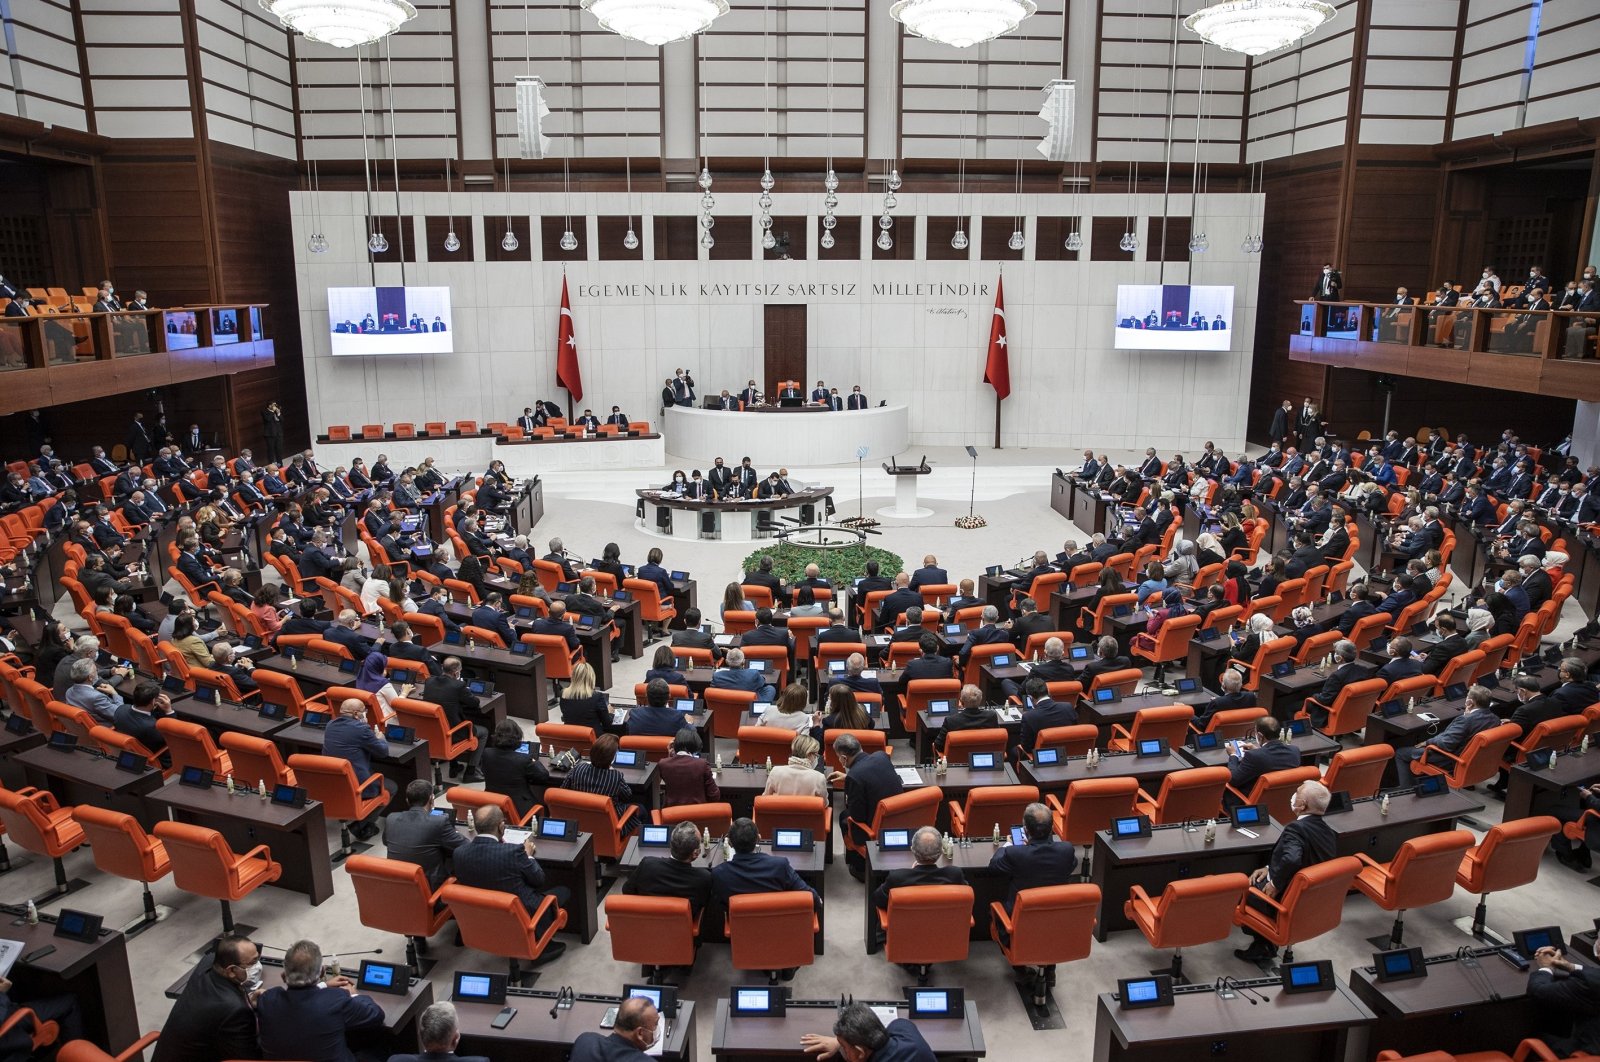 The Turkish Grand National Assembly (TBMM) convenes for the opening ceremony of the fifth legislative year of its 27th term, the capital Ankara, Turkey, Oct. 1, 2021. (AA Photo)